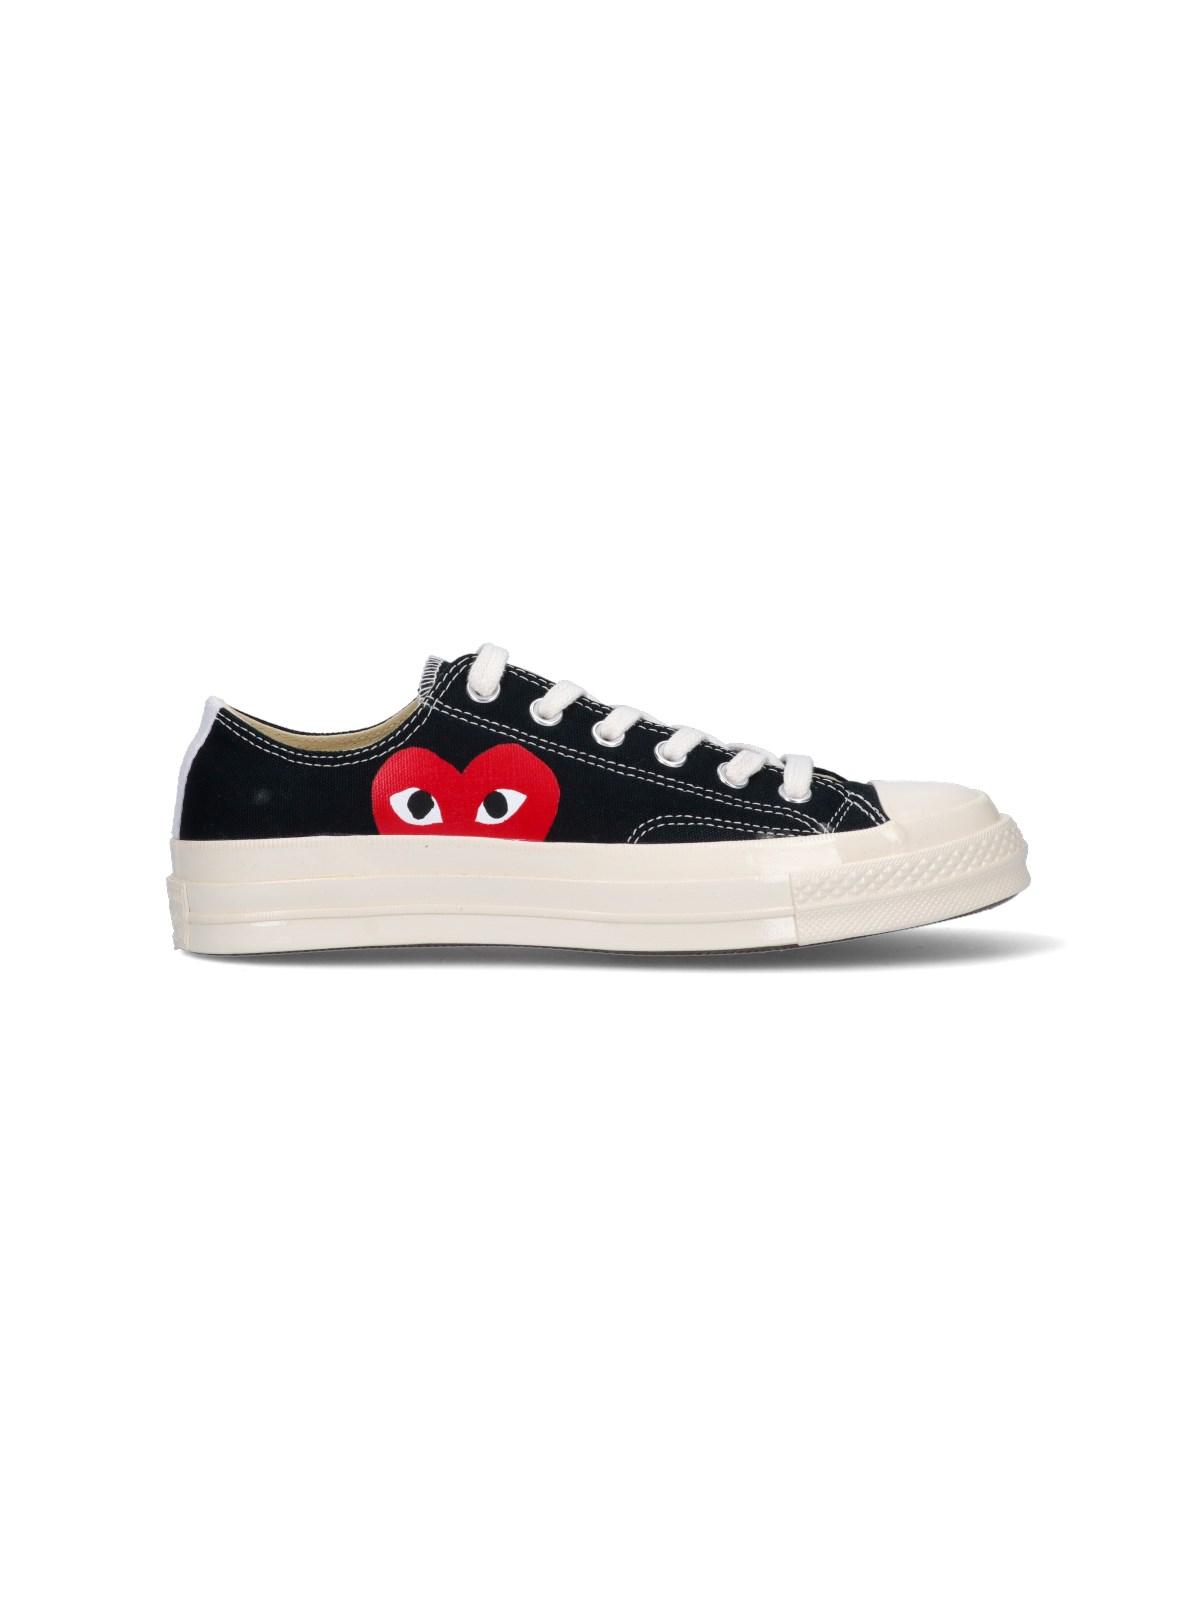 COMME DES GARÇONS PLAY Low Top 'converse Chuck 70' Sneakers in Black | Lyst